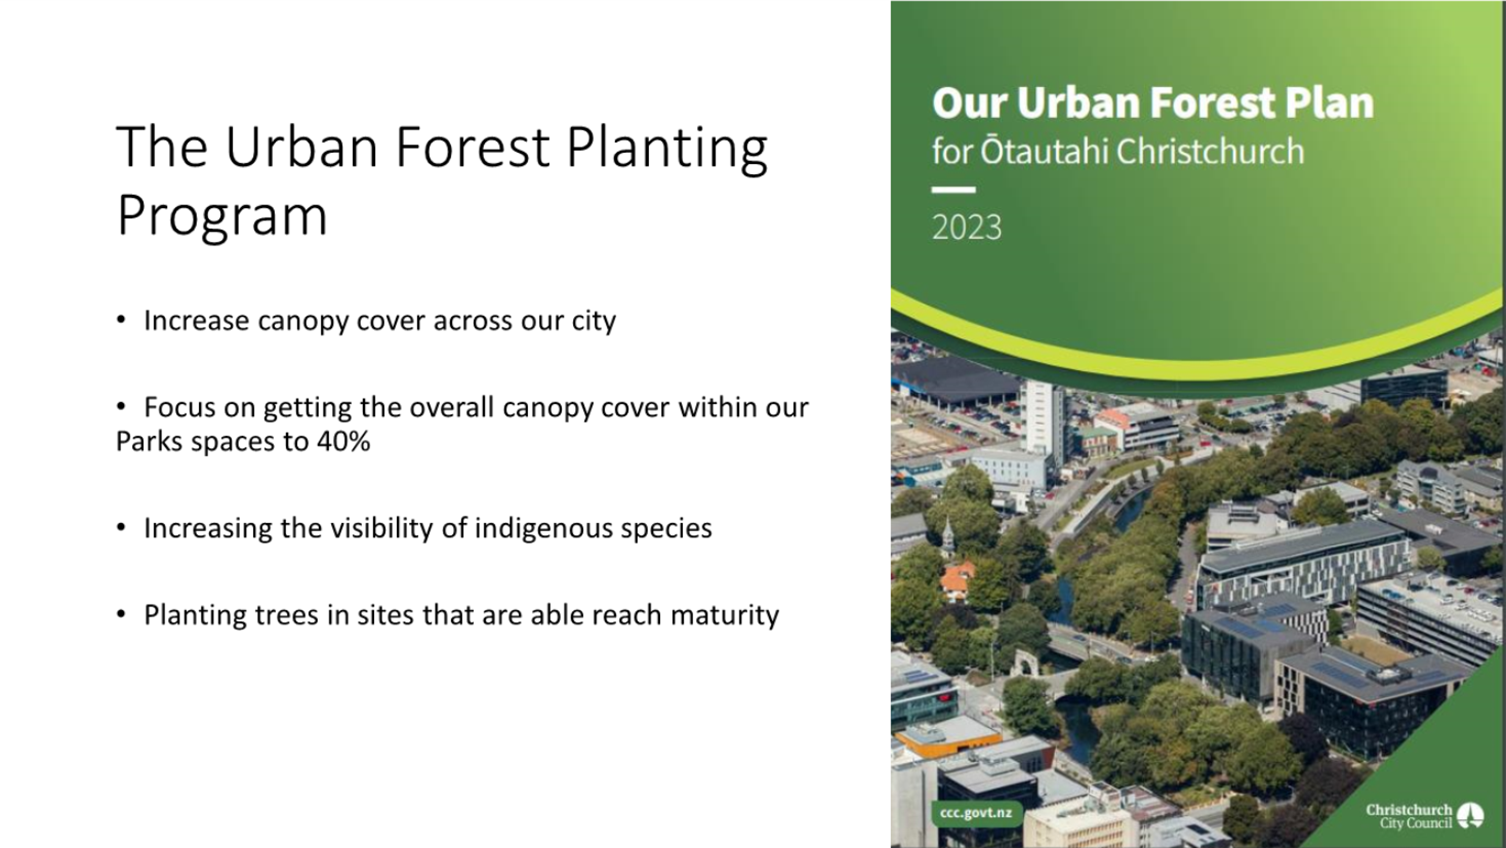 A brochure with a green cover and a green and white background

Description automatically generated